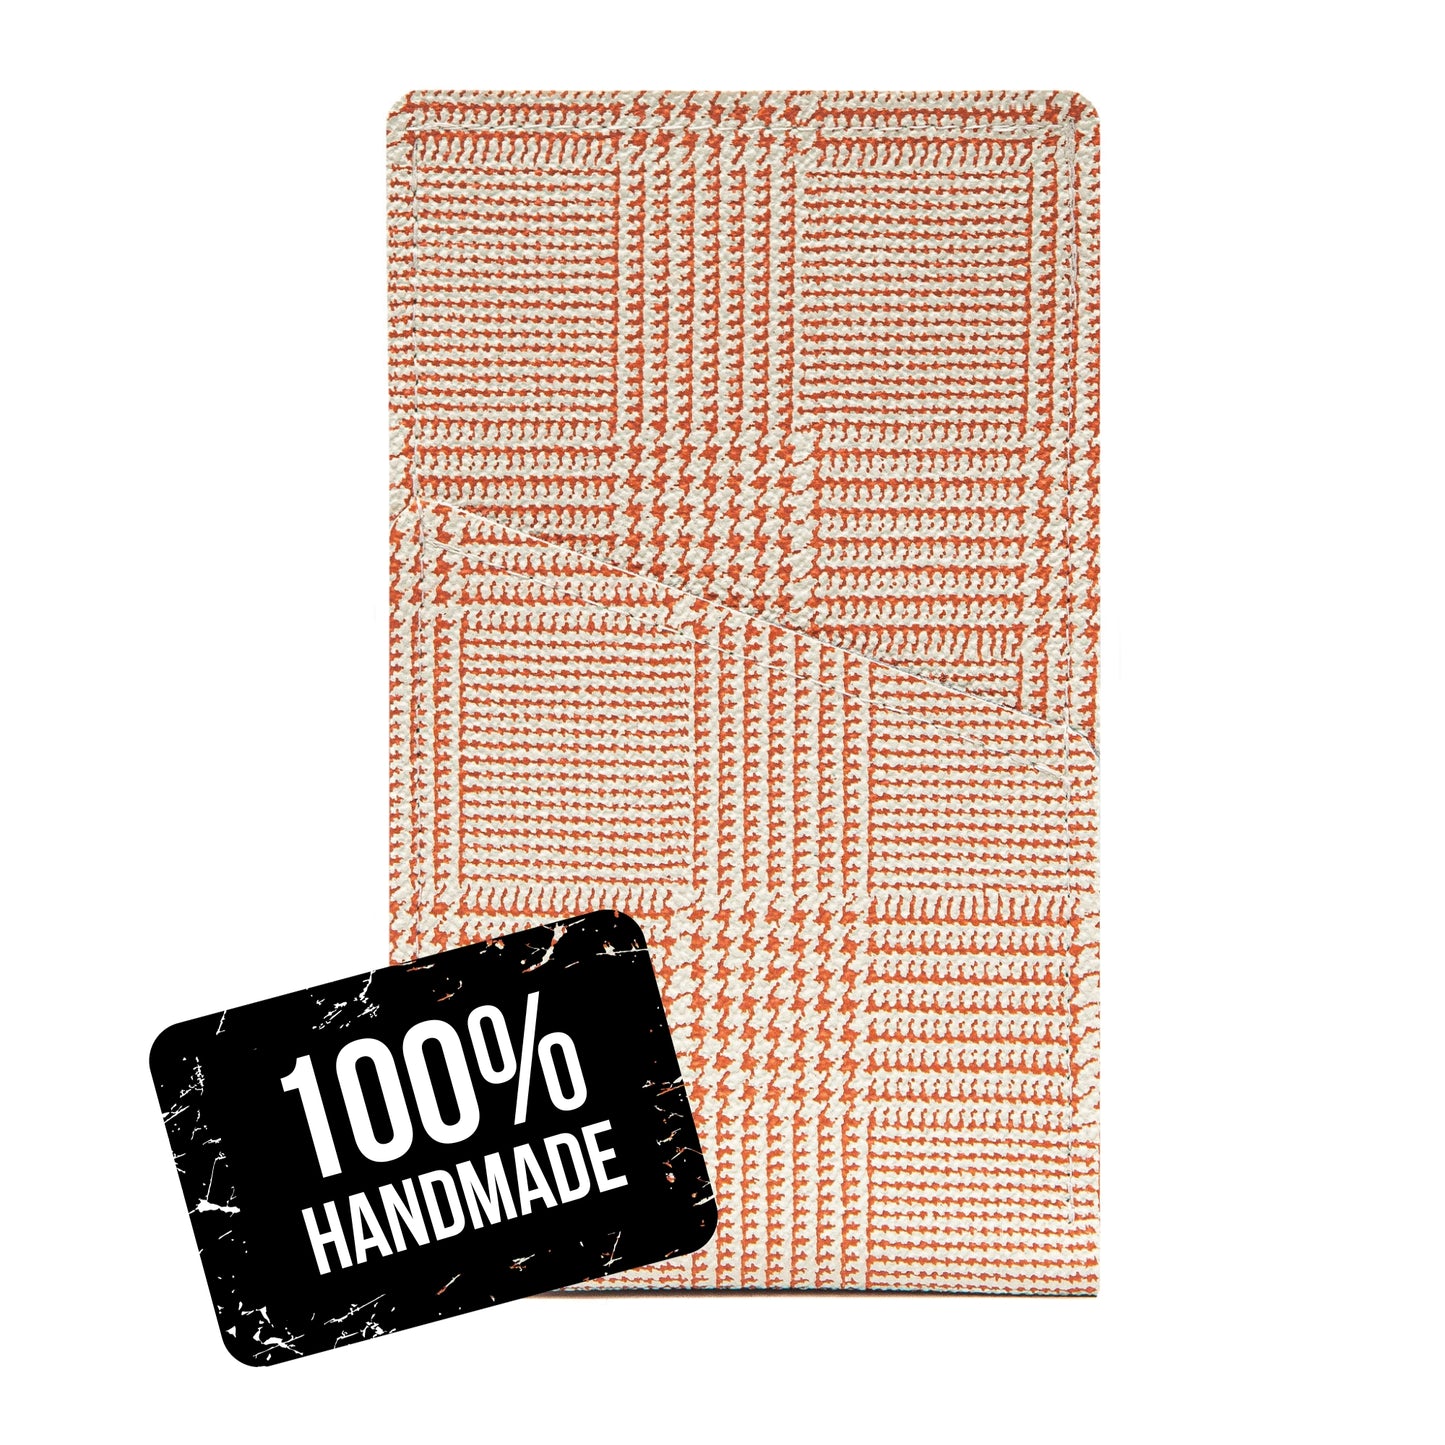 Modern Faux Leather iPhone Sleeve with Cream and Orange Striped Design and Card Pocket